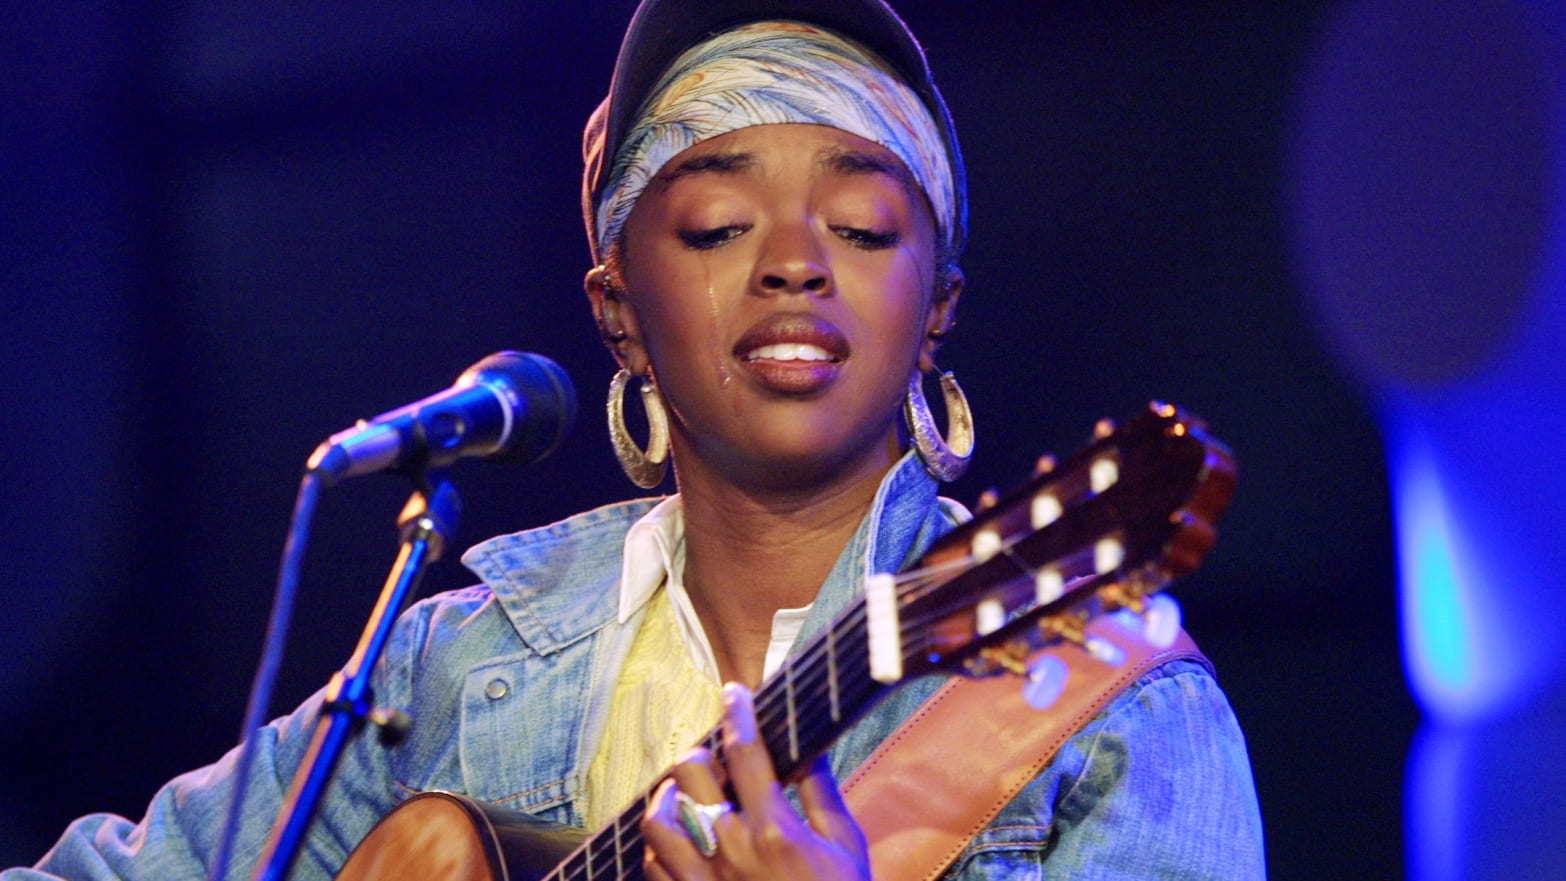 How A Racist Smear Campaign Derailed Lauryn Hill’s Career